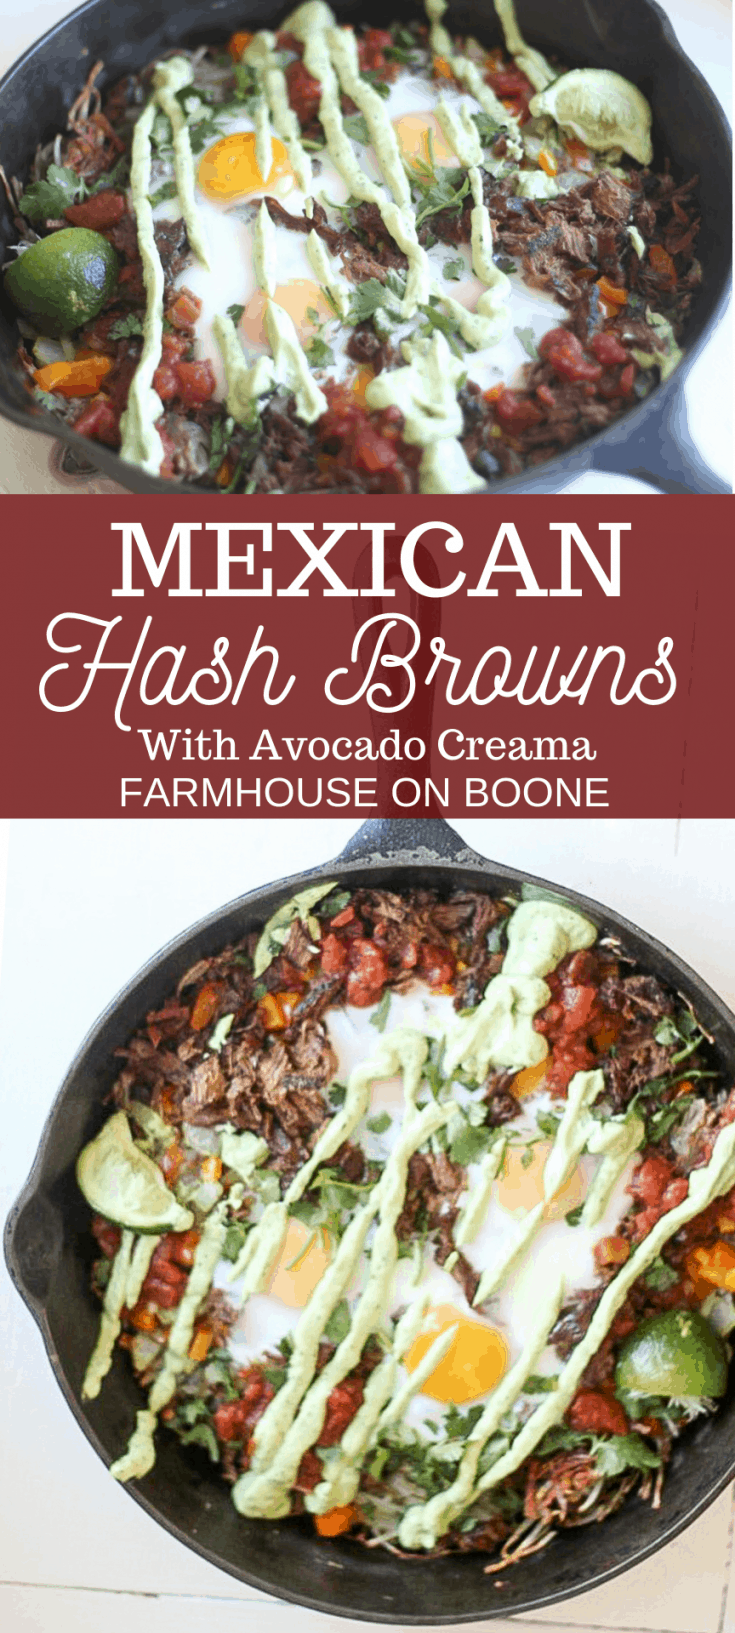 Mexican Hash Browns with Avocado Crema - Farmhouse on Boone